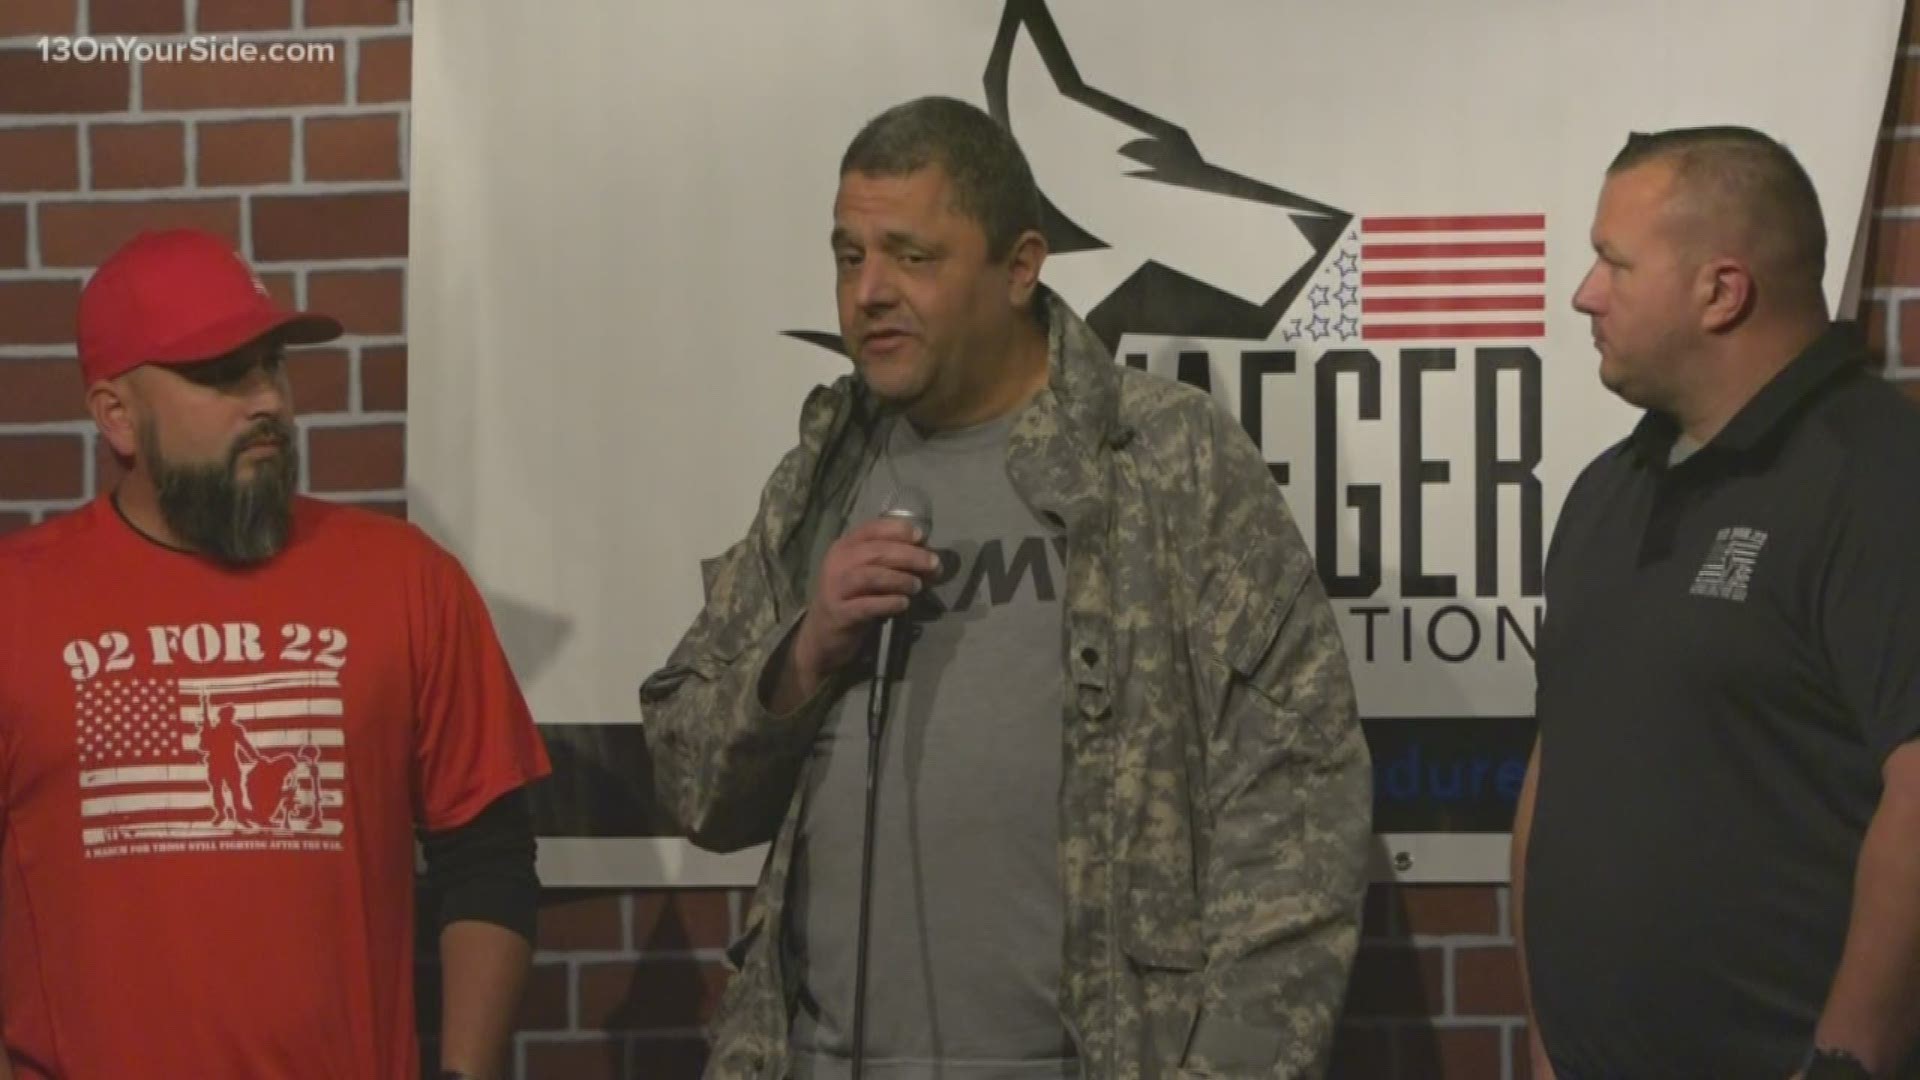 The Jaeger Foundation raises money to provide service dogs to veterans who are suffering from PTSD.